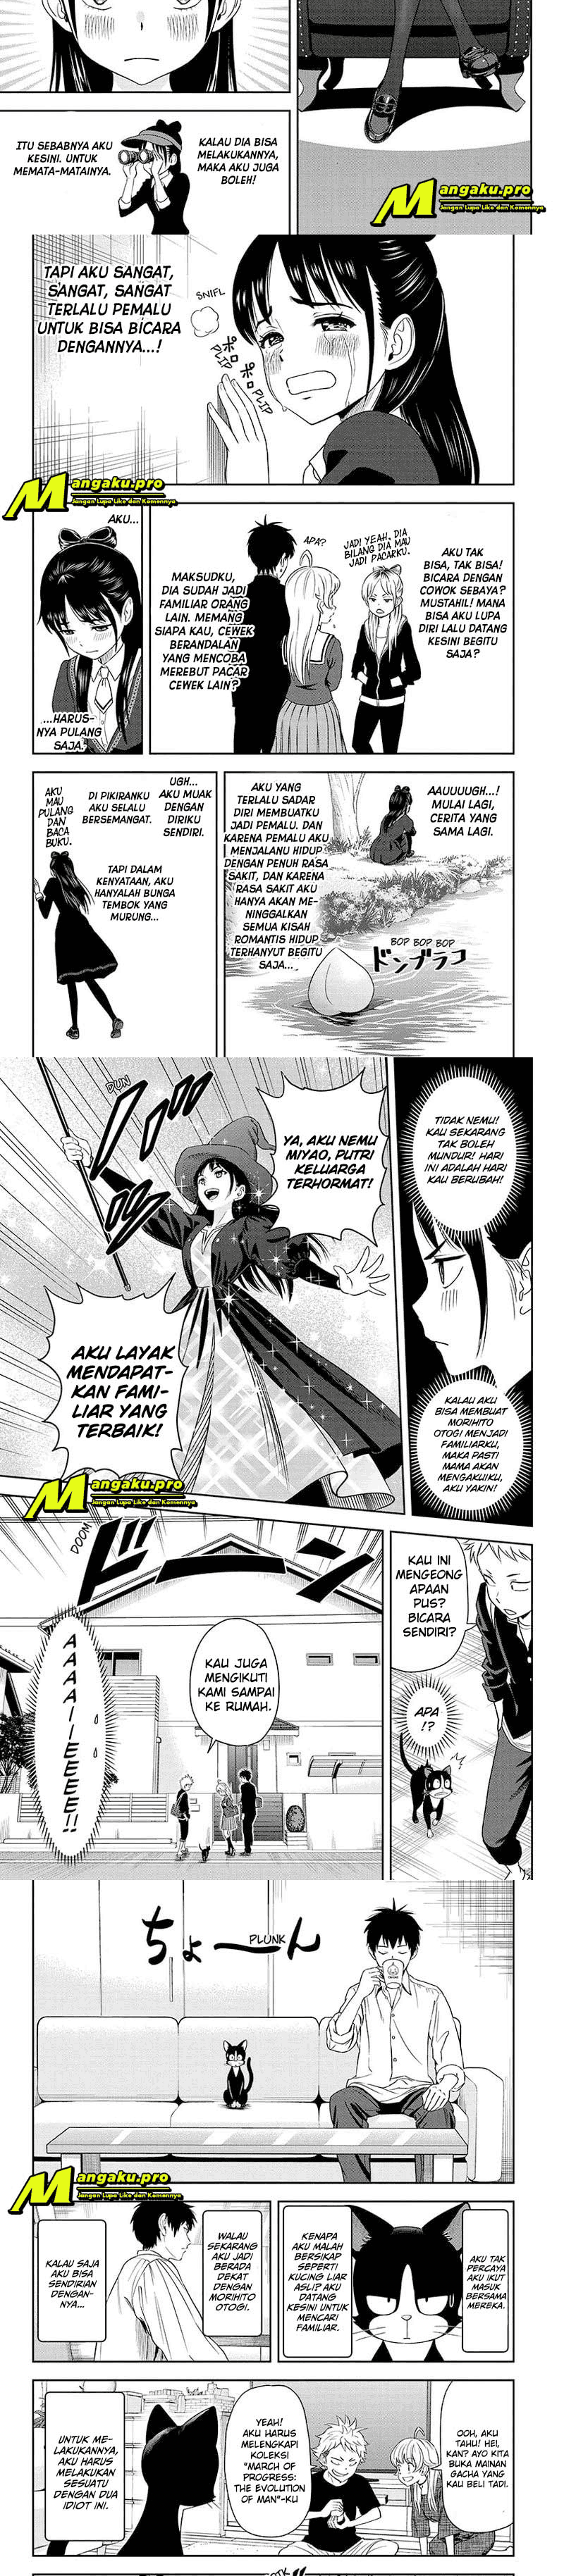 Witch Watch Chapter 15 4